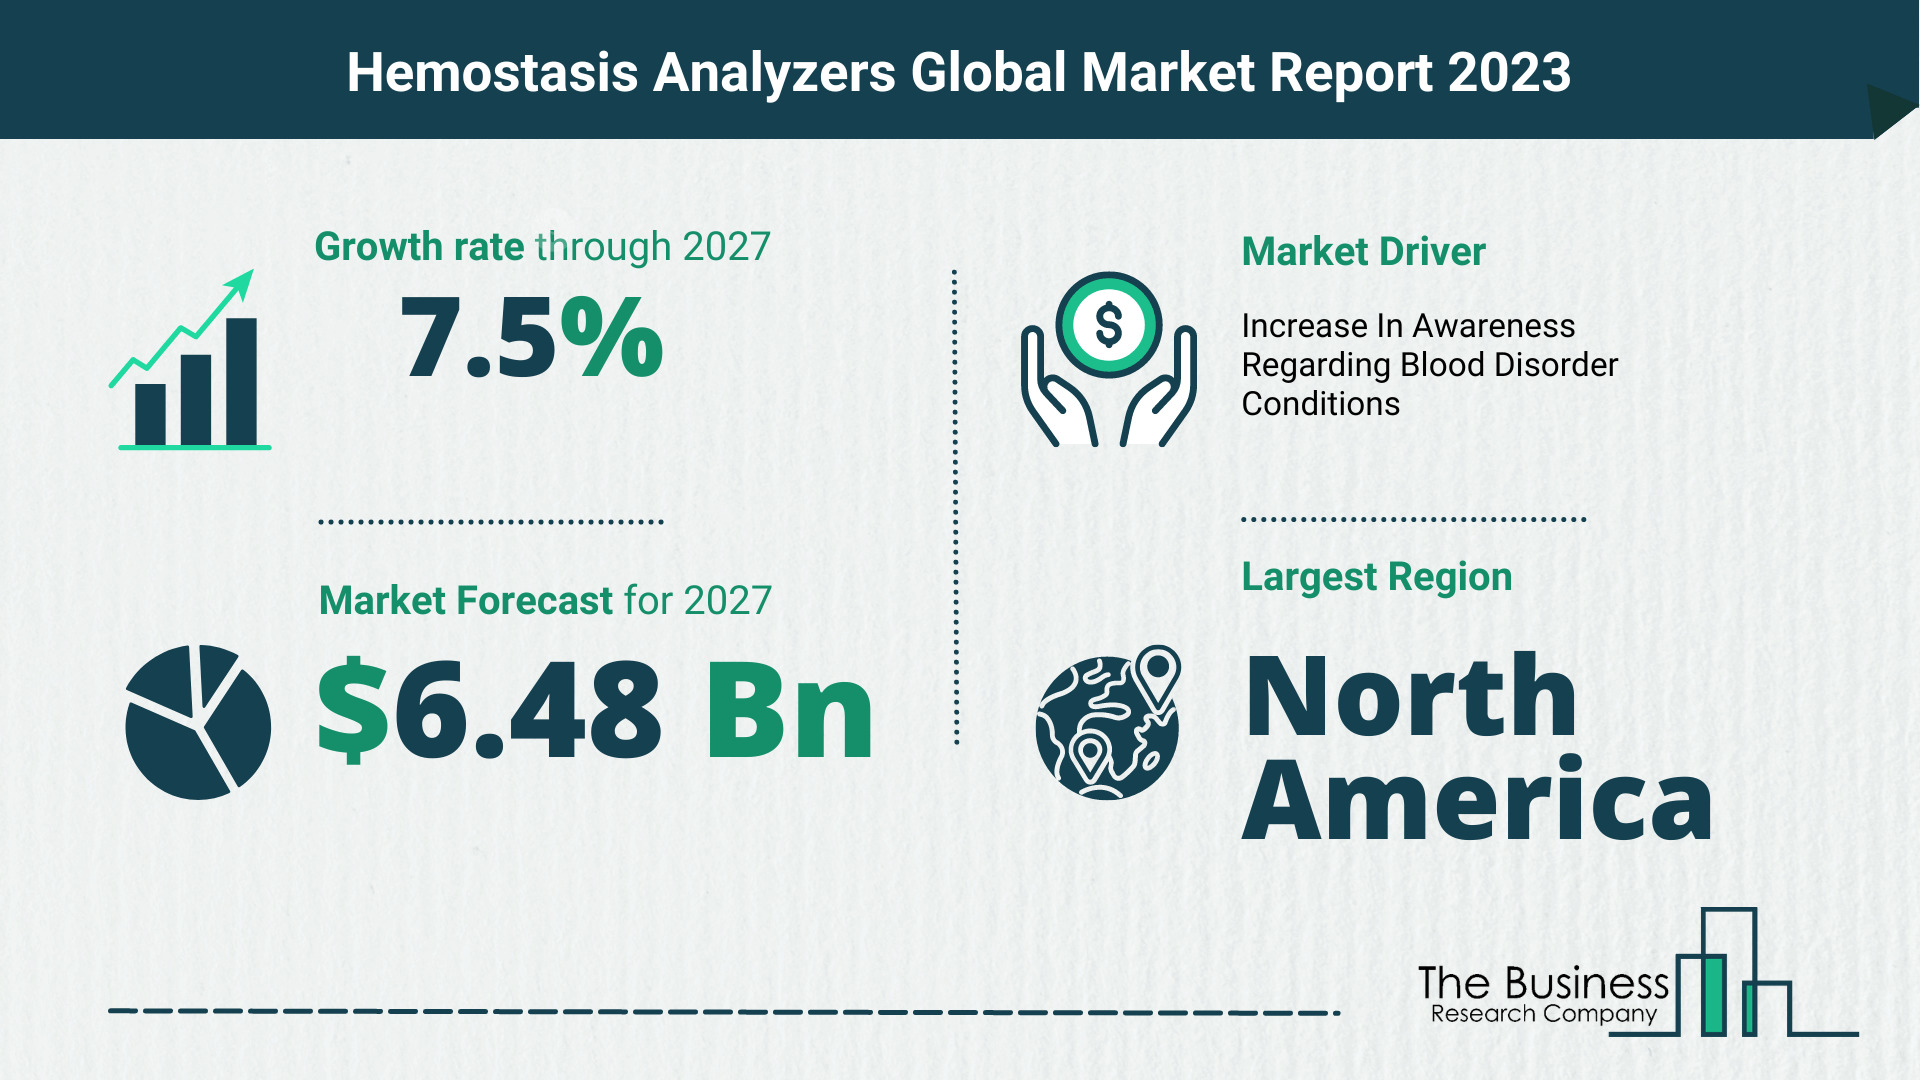 How Will The Hemostasis Analyzers Market Globally Expand In 2023?